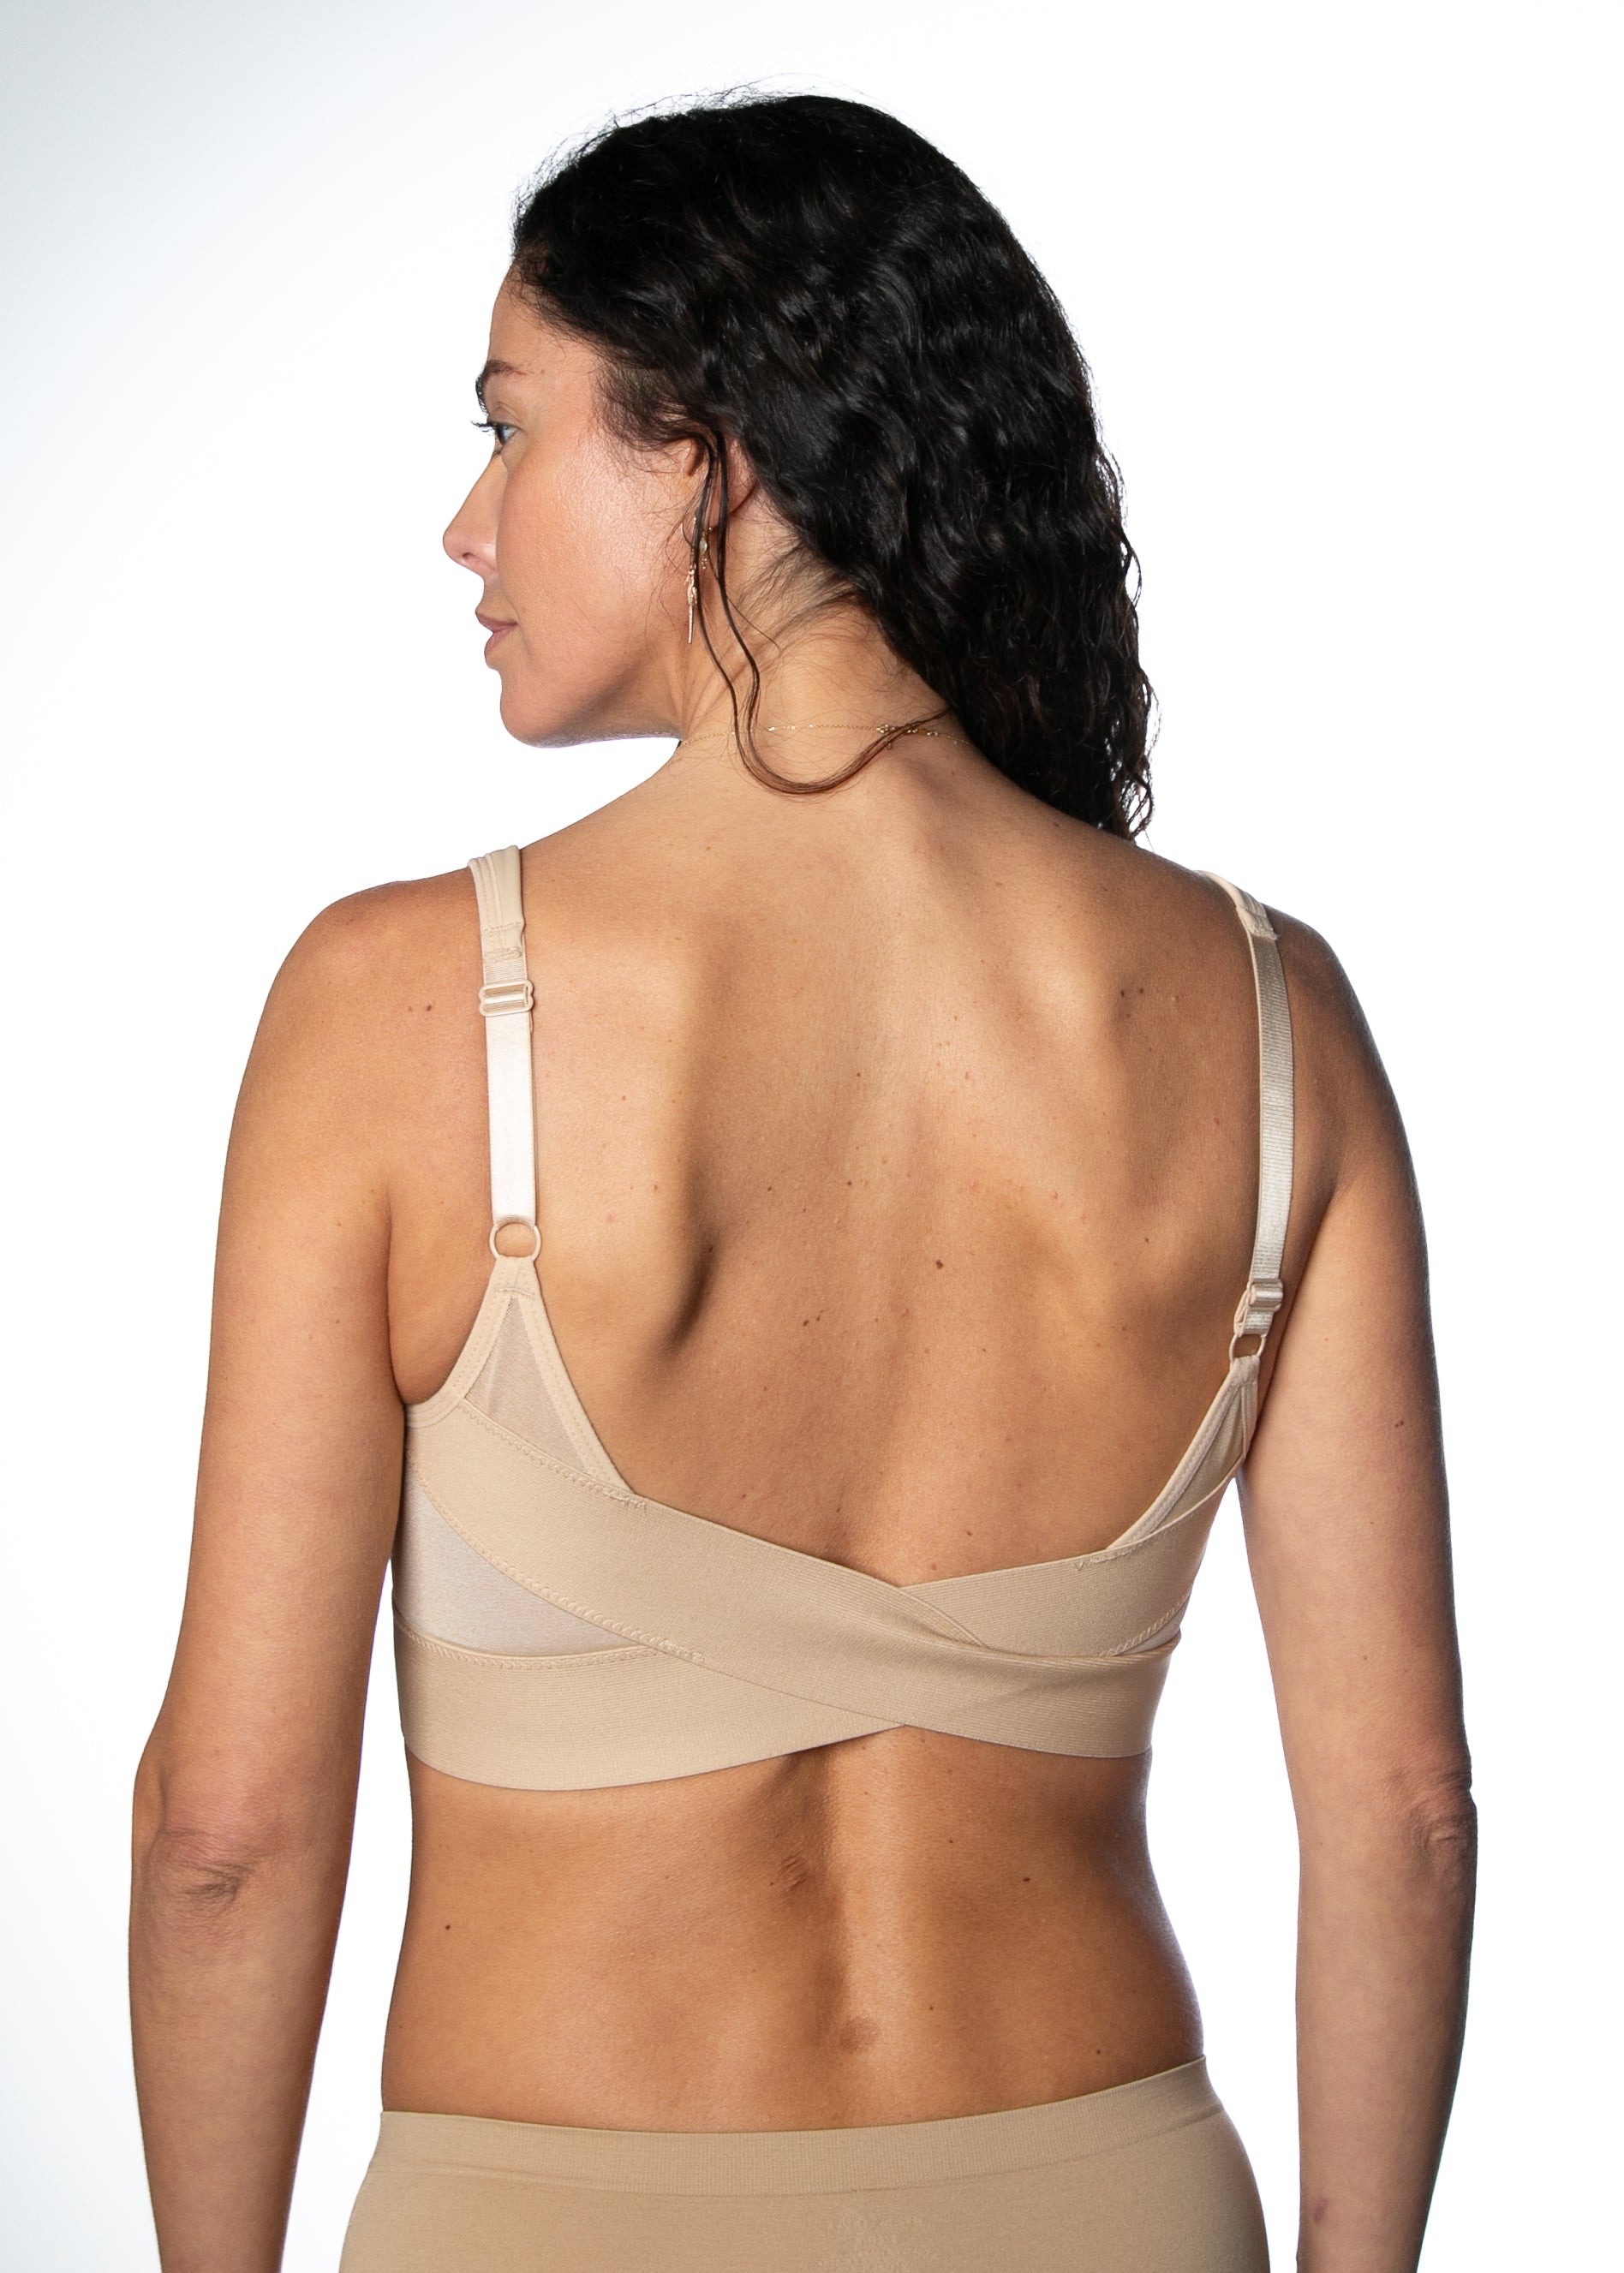 Rhonda Shear 2-pack Molded Cup Bra with Cross Back Mesh Detail - 21489860